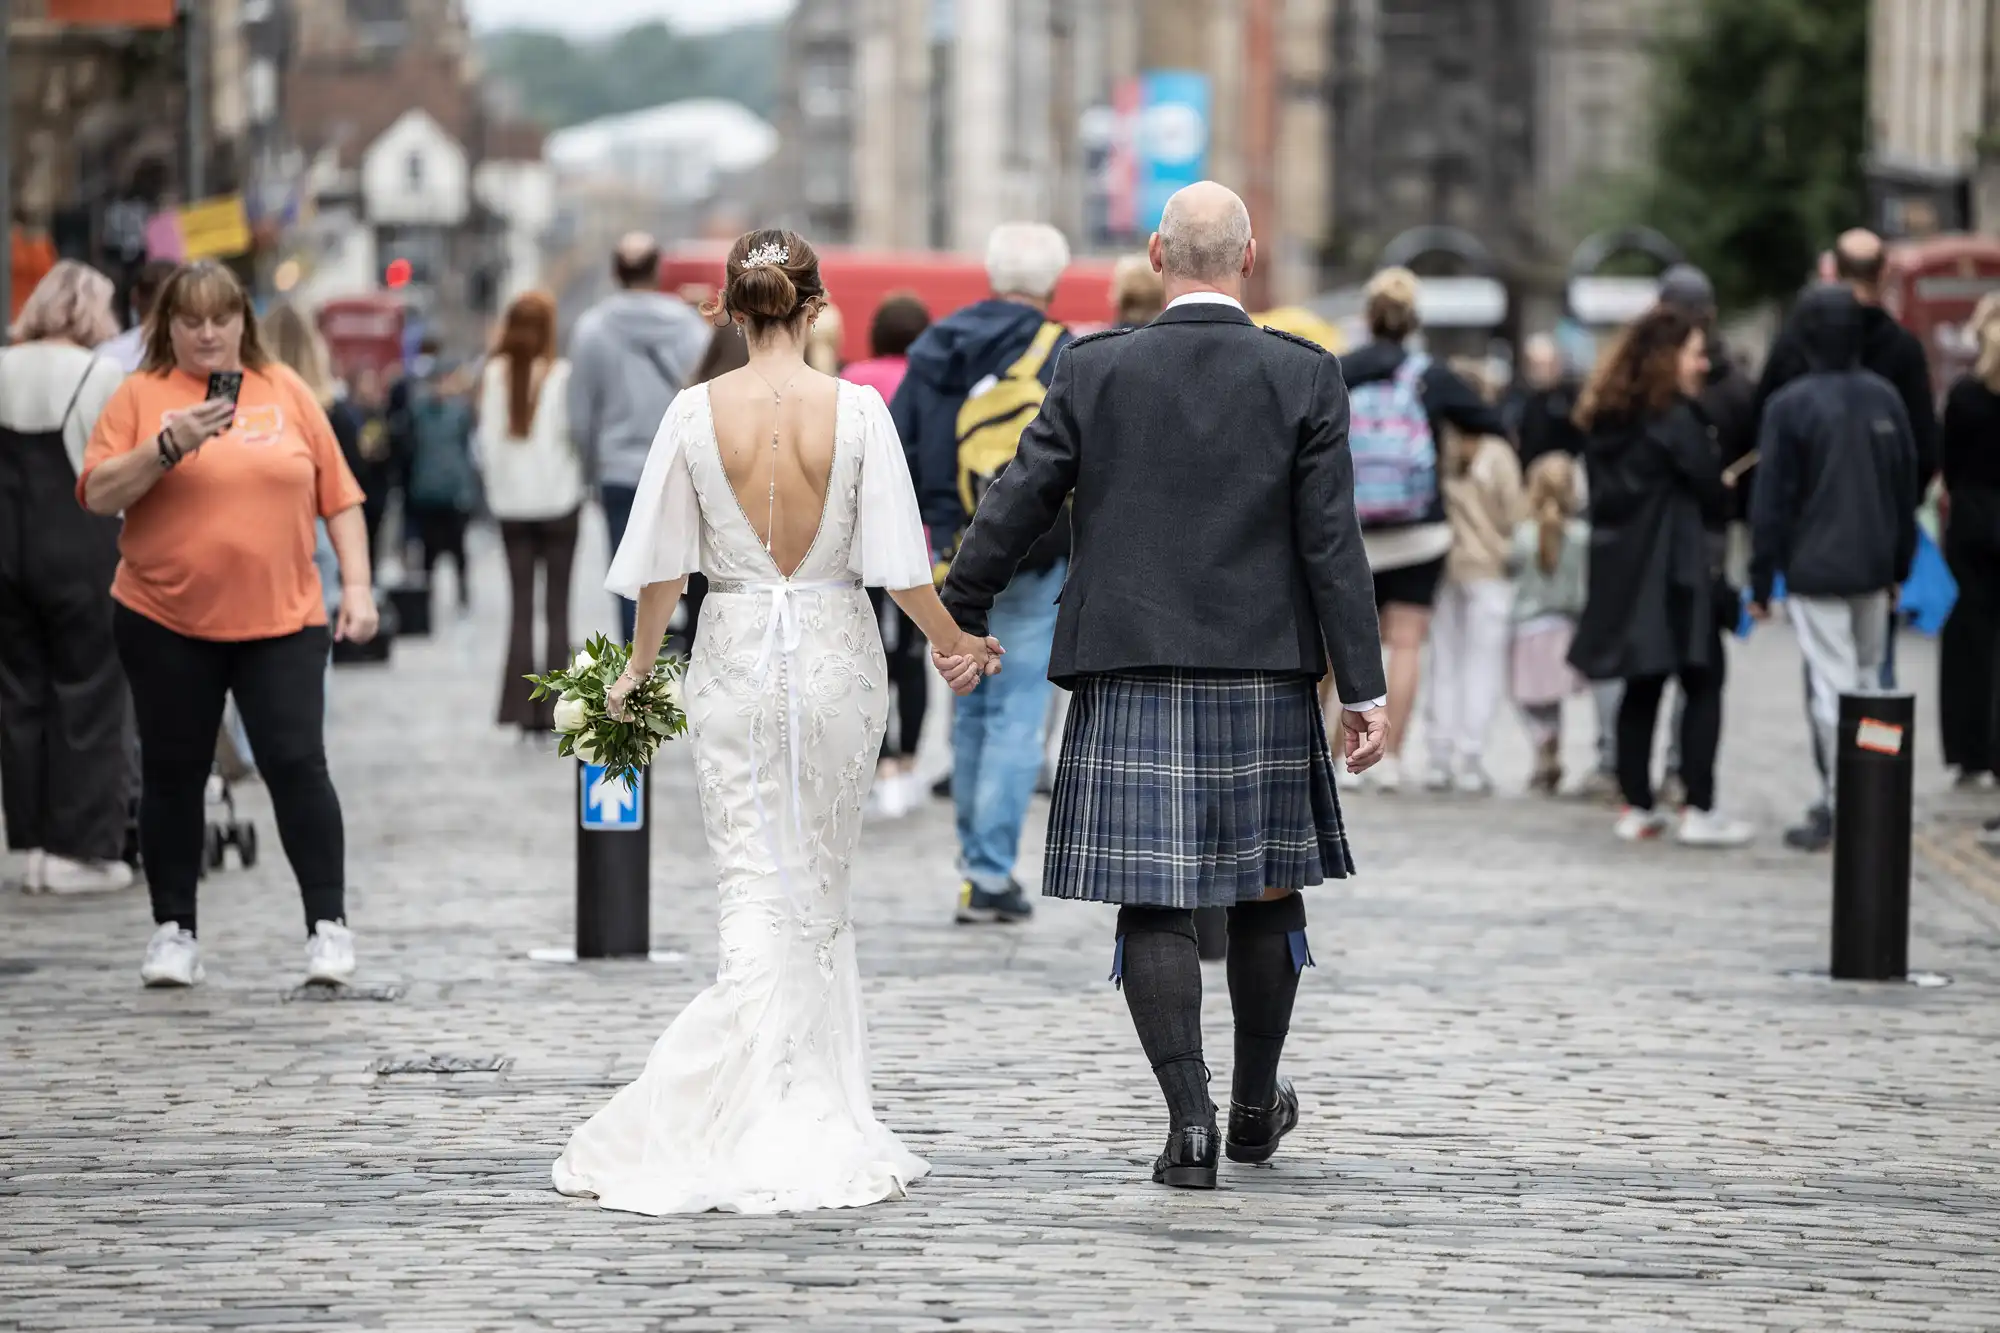 A bride in a white dress holding a bouquet and a man in traditional Scottish attire walk hand-in-hand on a cobblestone street, with people and buildings in the background.